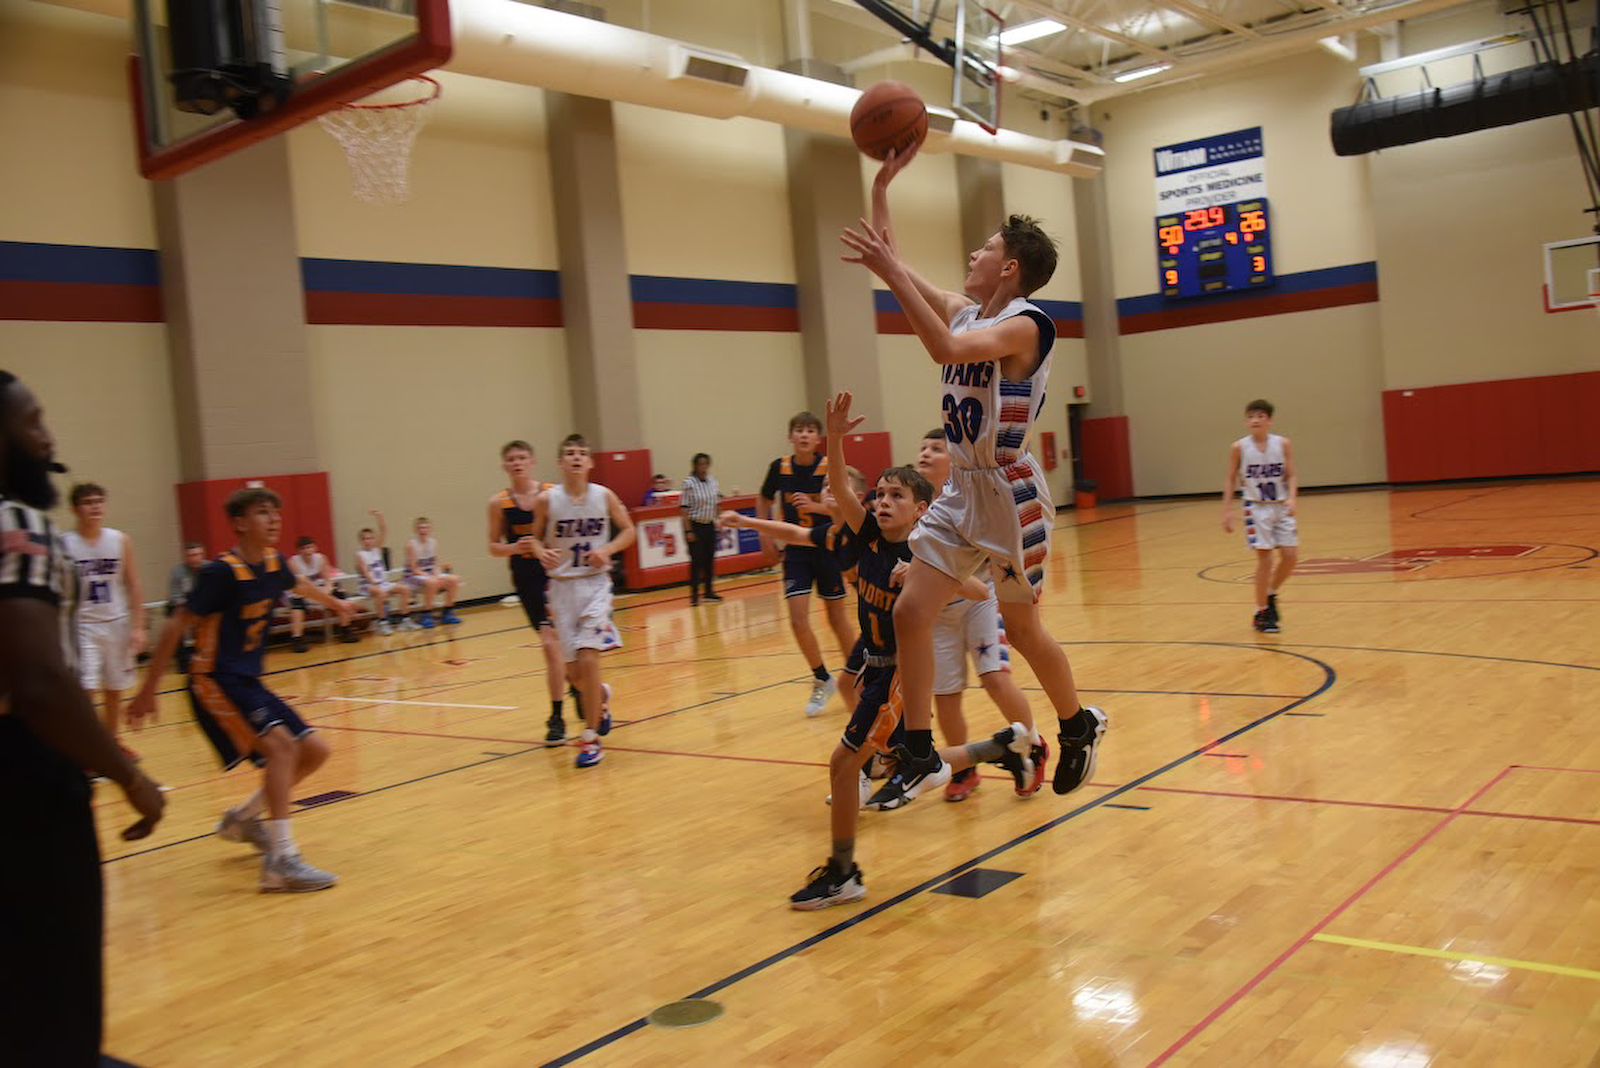 JH Stars sweep Chargers in boys basketball cover photo